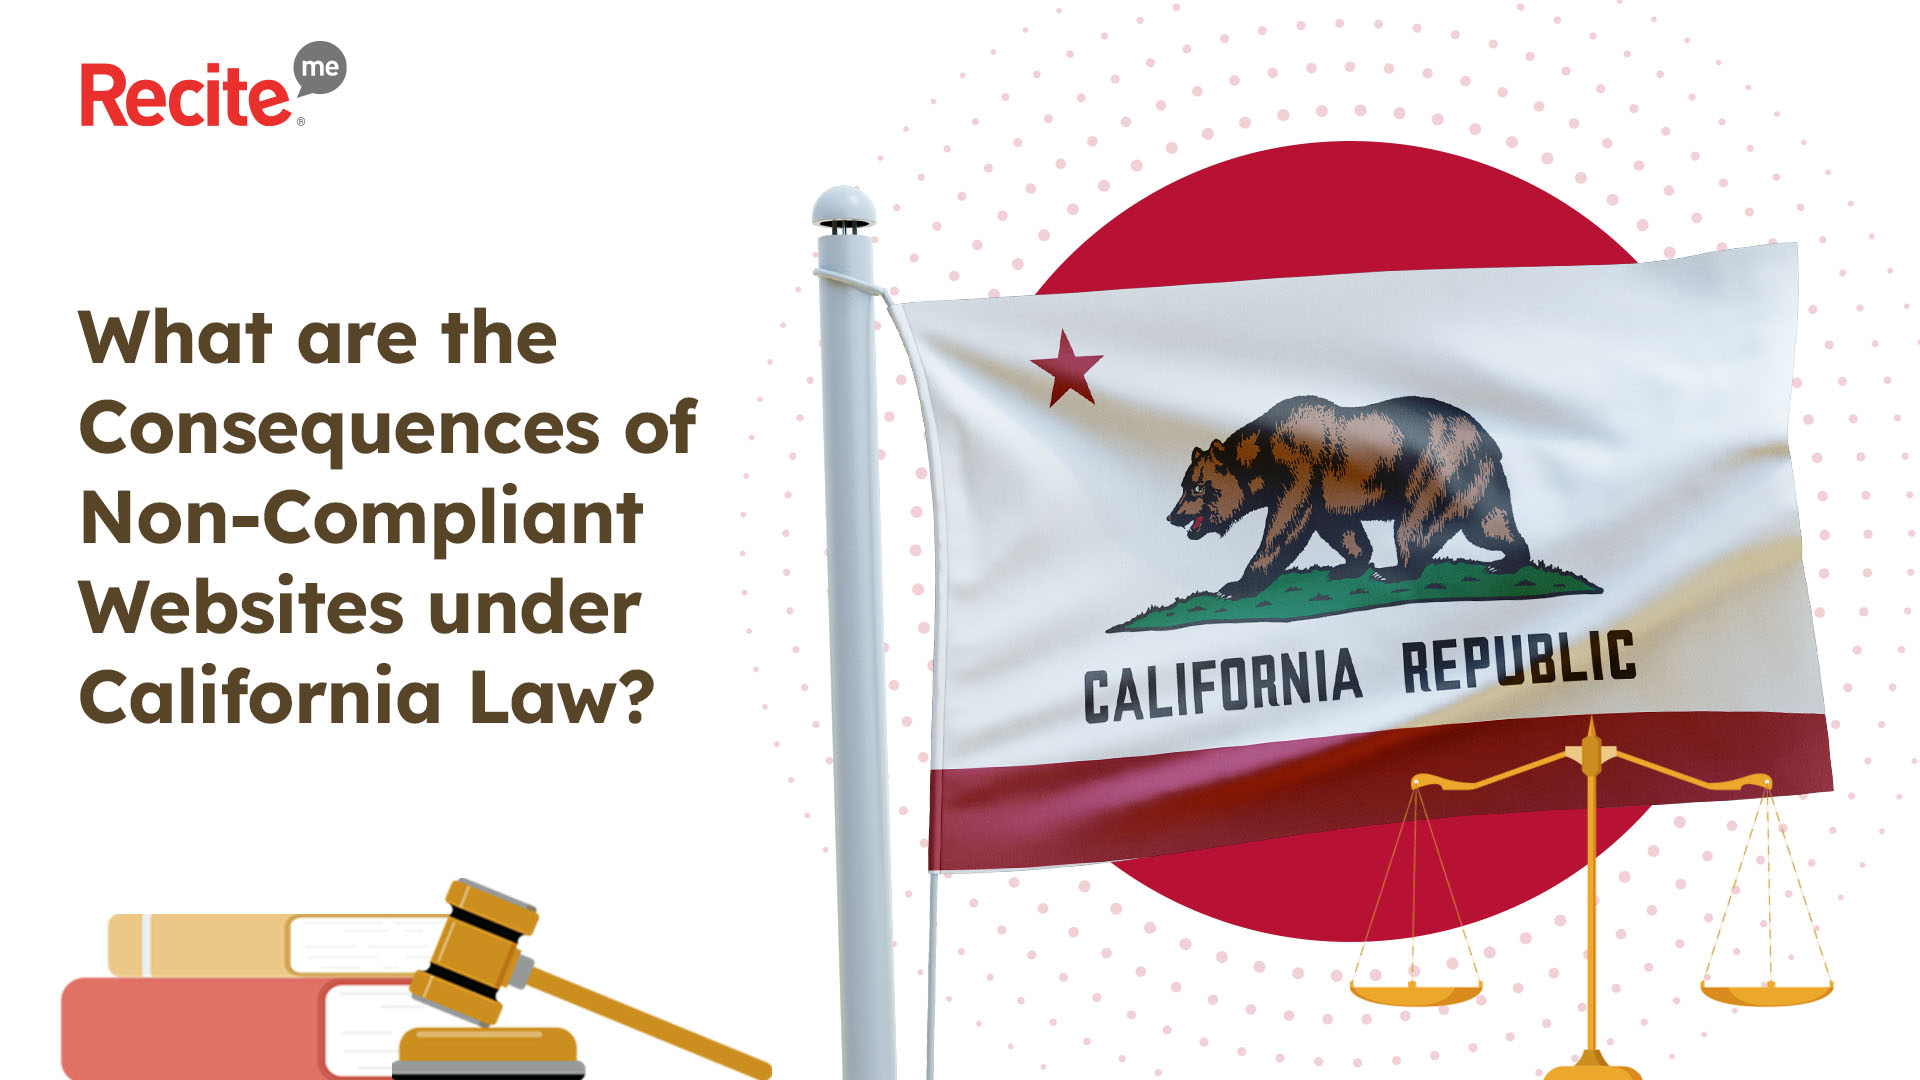 What are the consequences of a non-compliant website under California Law